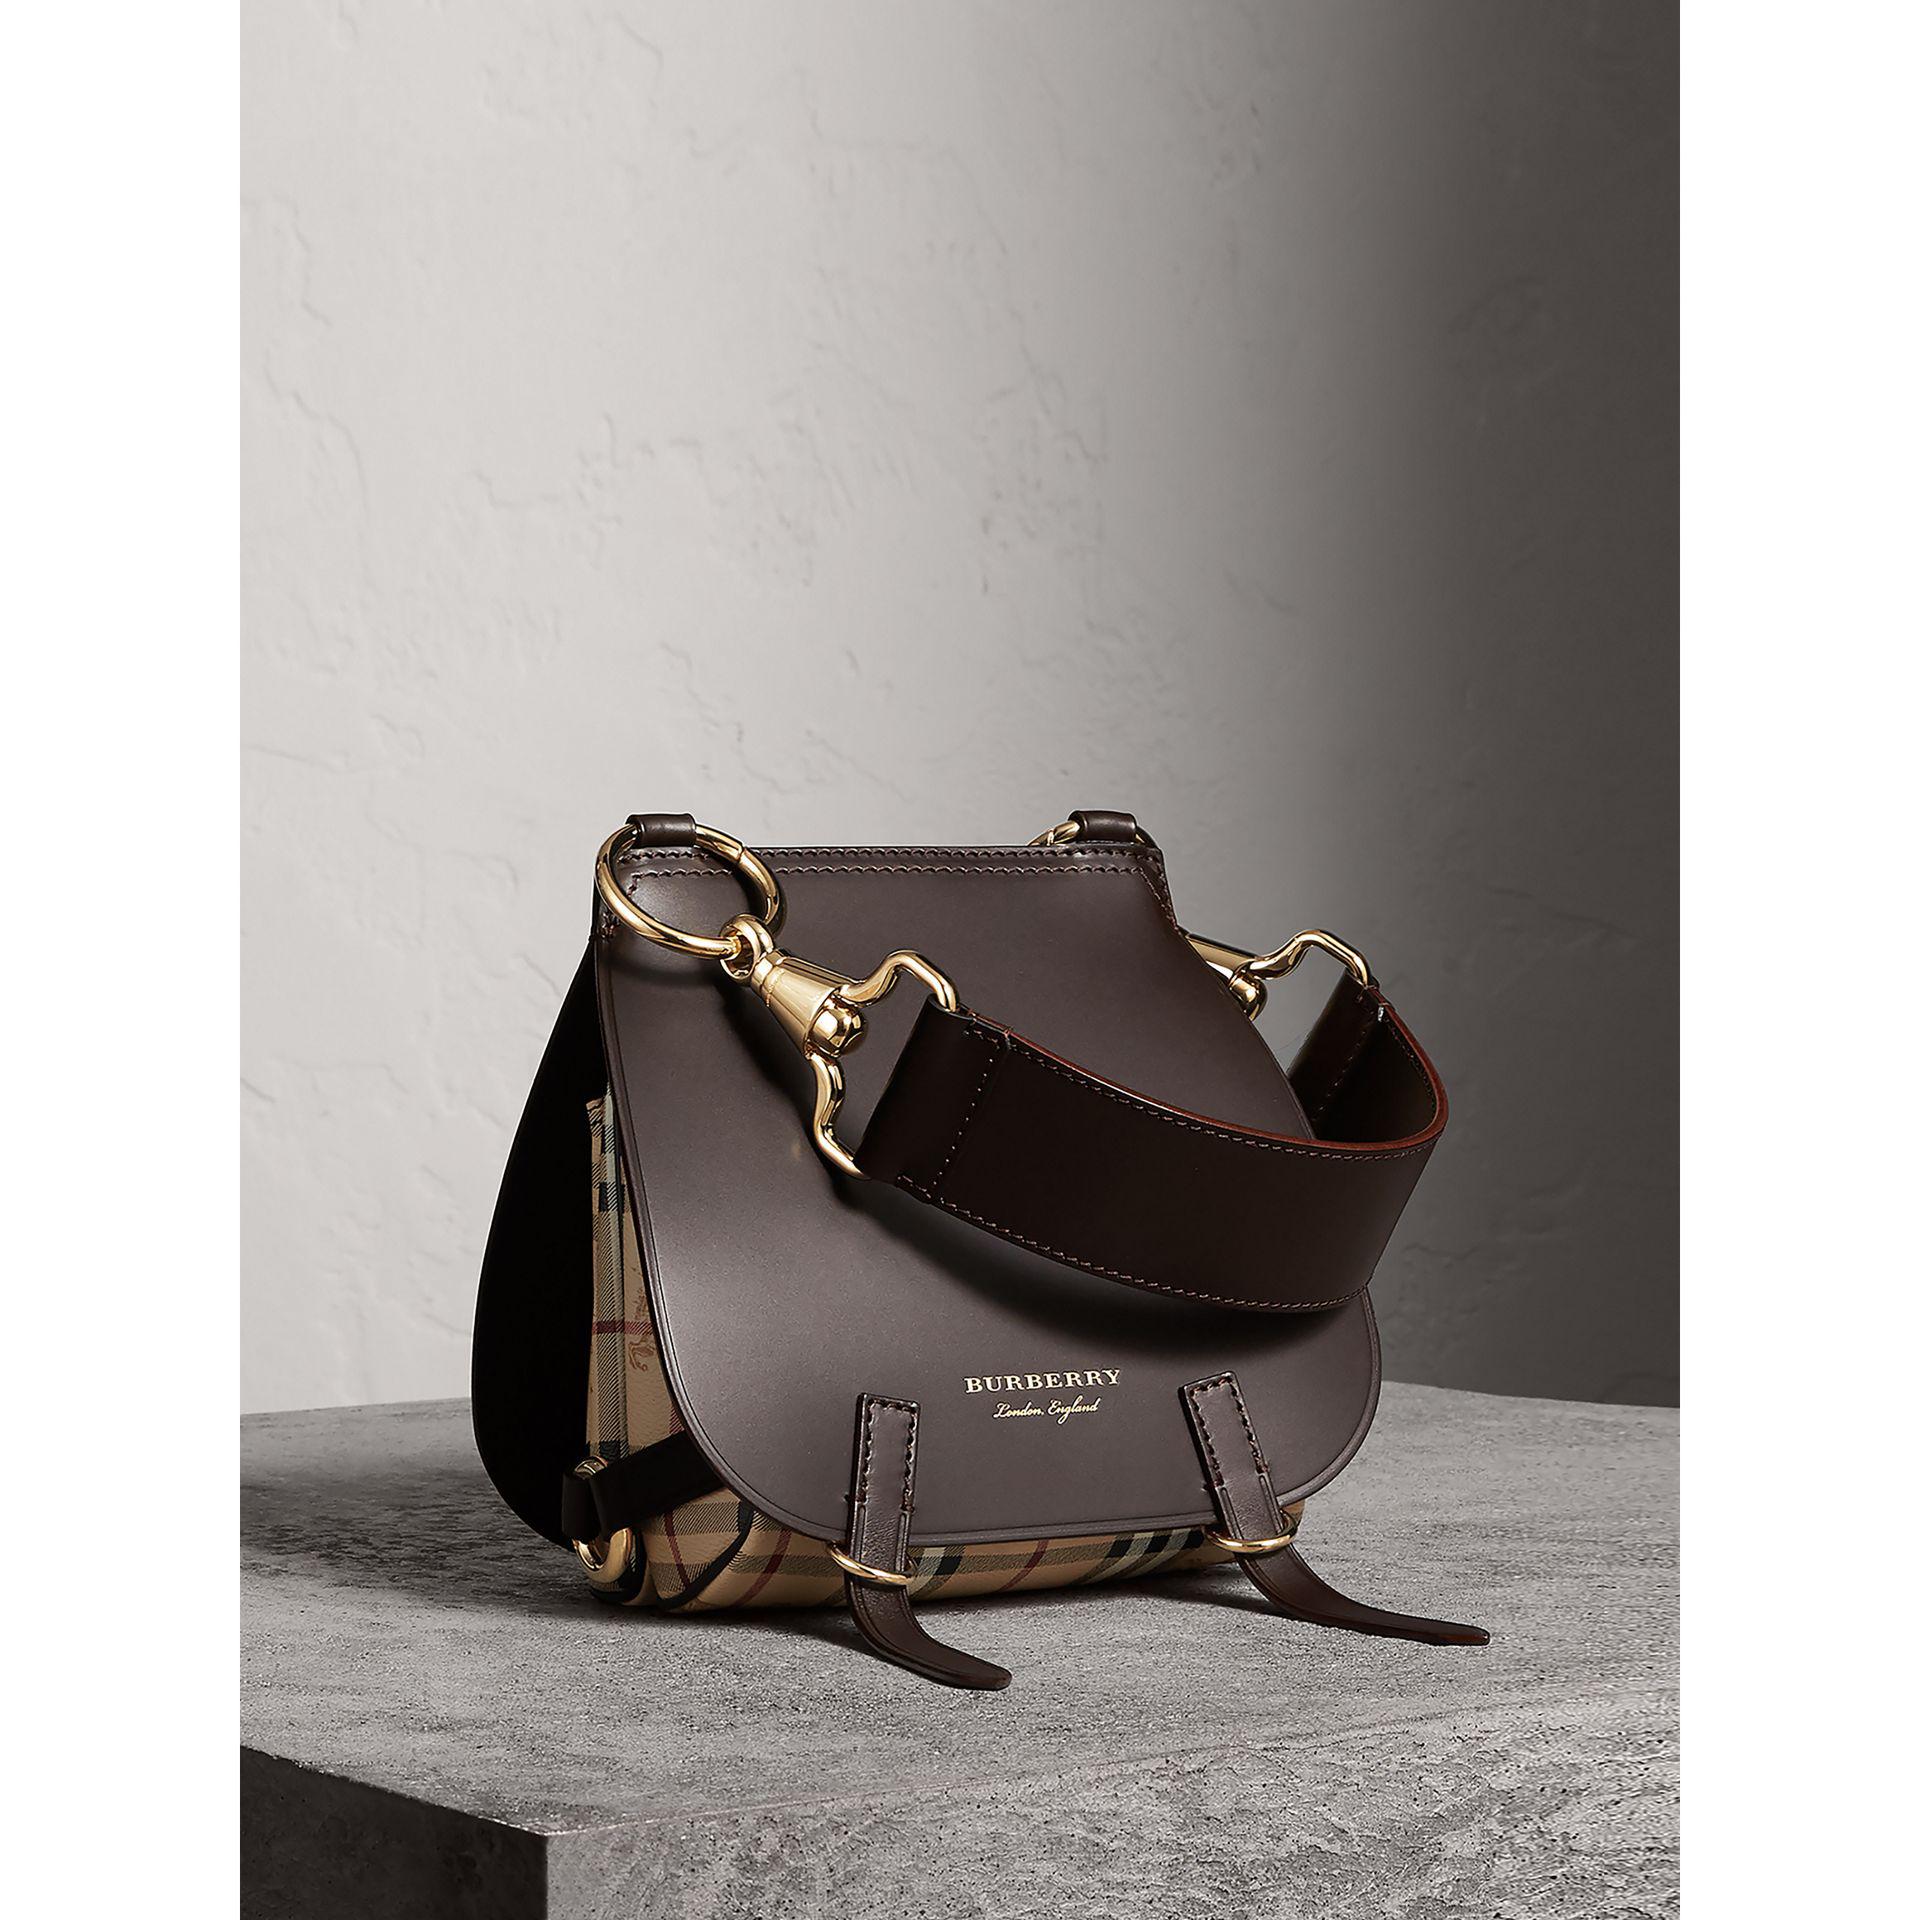 Burberry The Bridle Bag In Leather And Haymarket Check Dark Clove